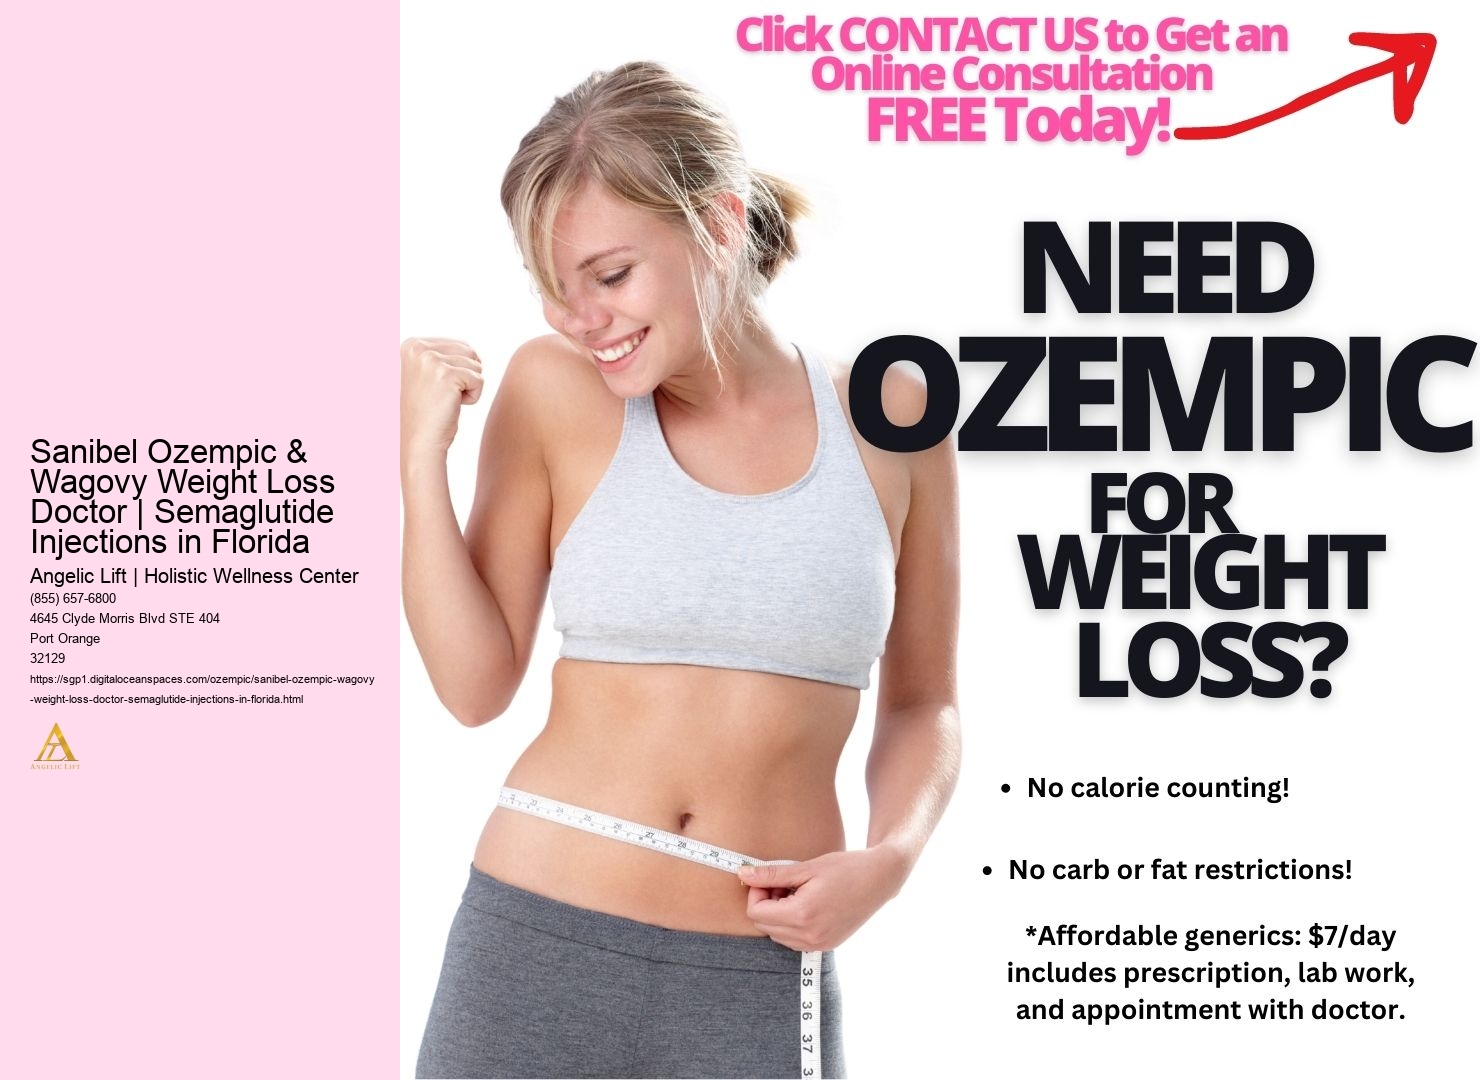 Sanibel Ozempic & Wagovy Weight Loss Doctor | Semaglutide Injections in Florida